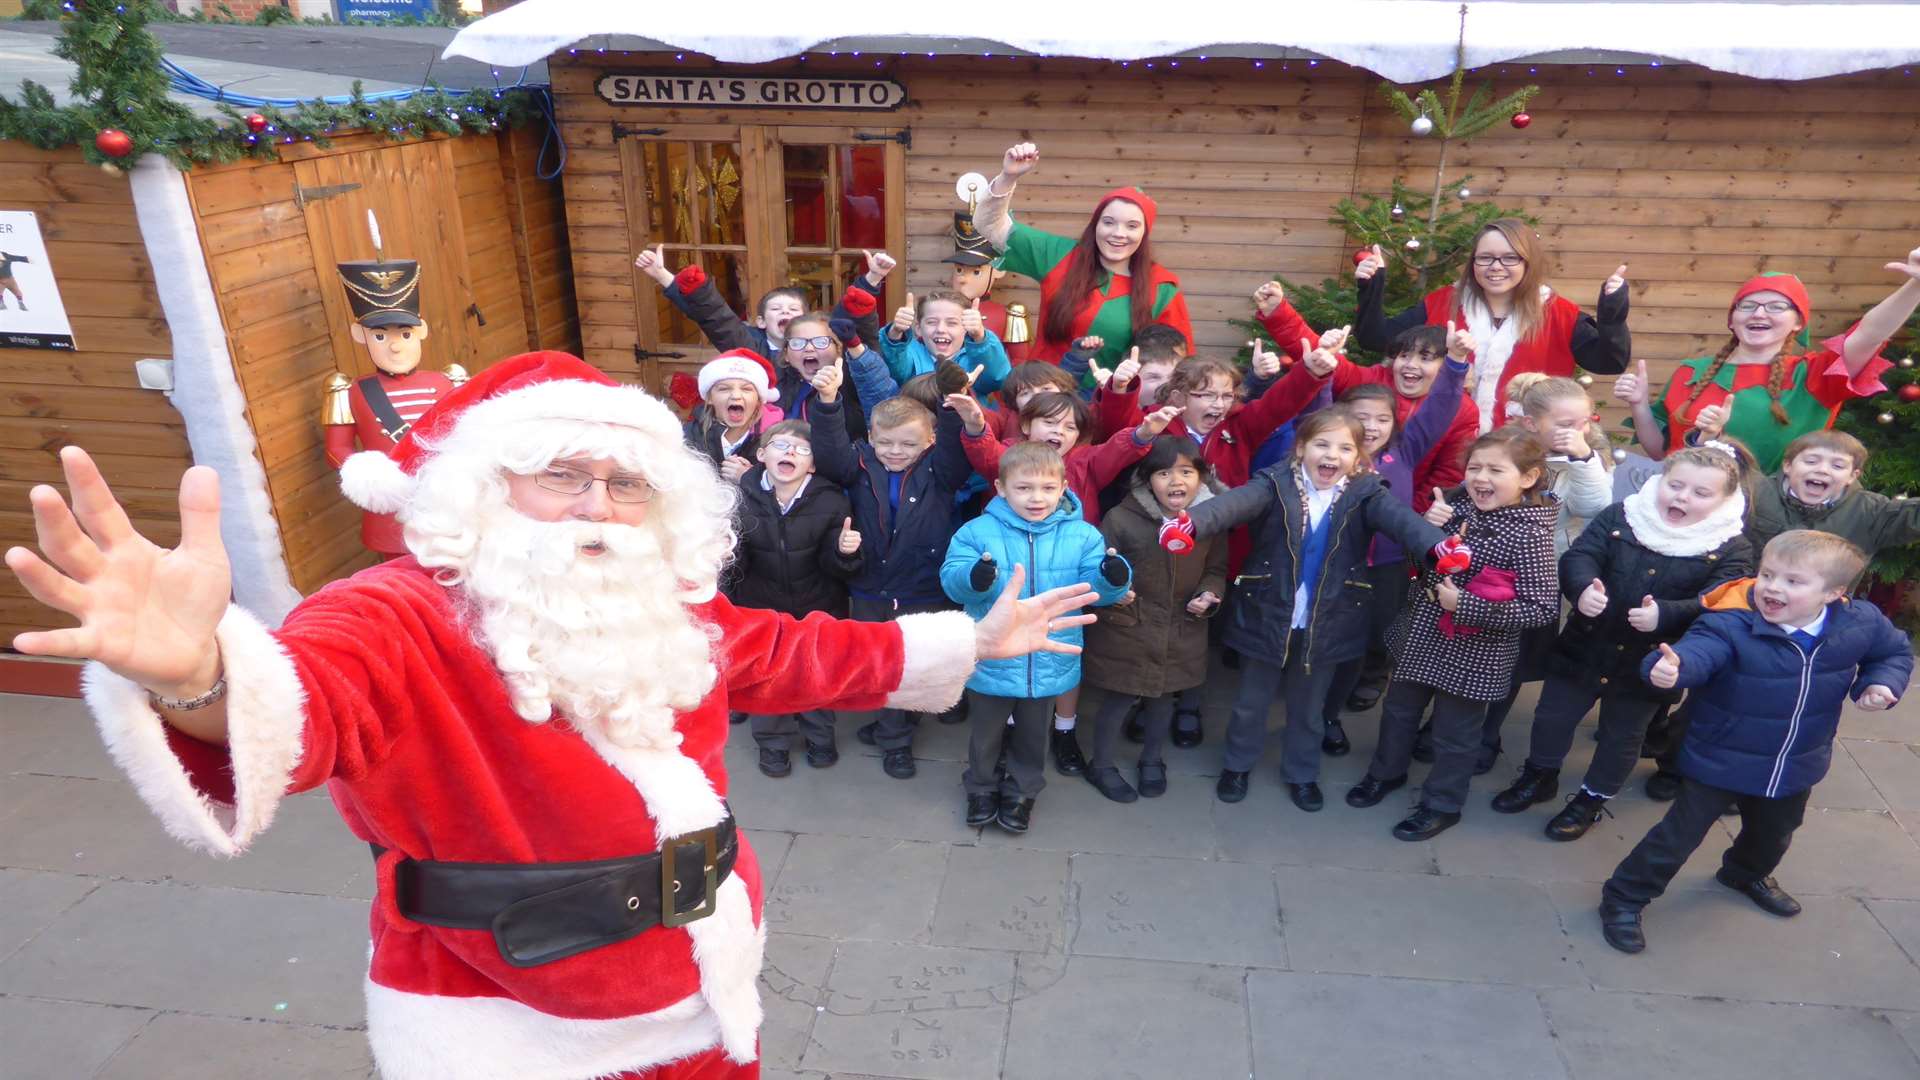 Class 3 of St Peter's Methodist Primary School collect their prize of a visit to Santa's grotto in Whitefriars after winning a walk to school challenge.